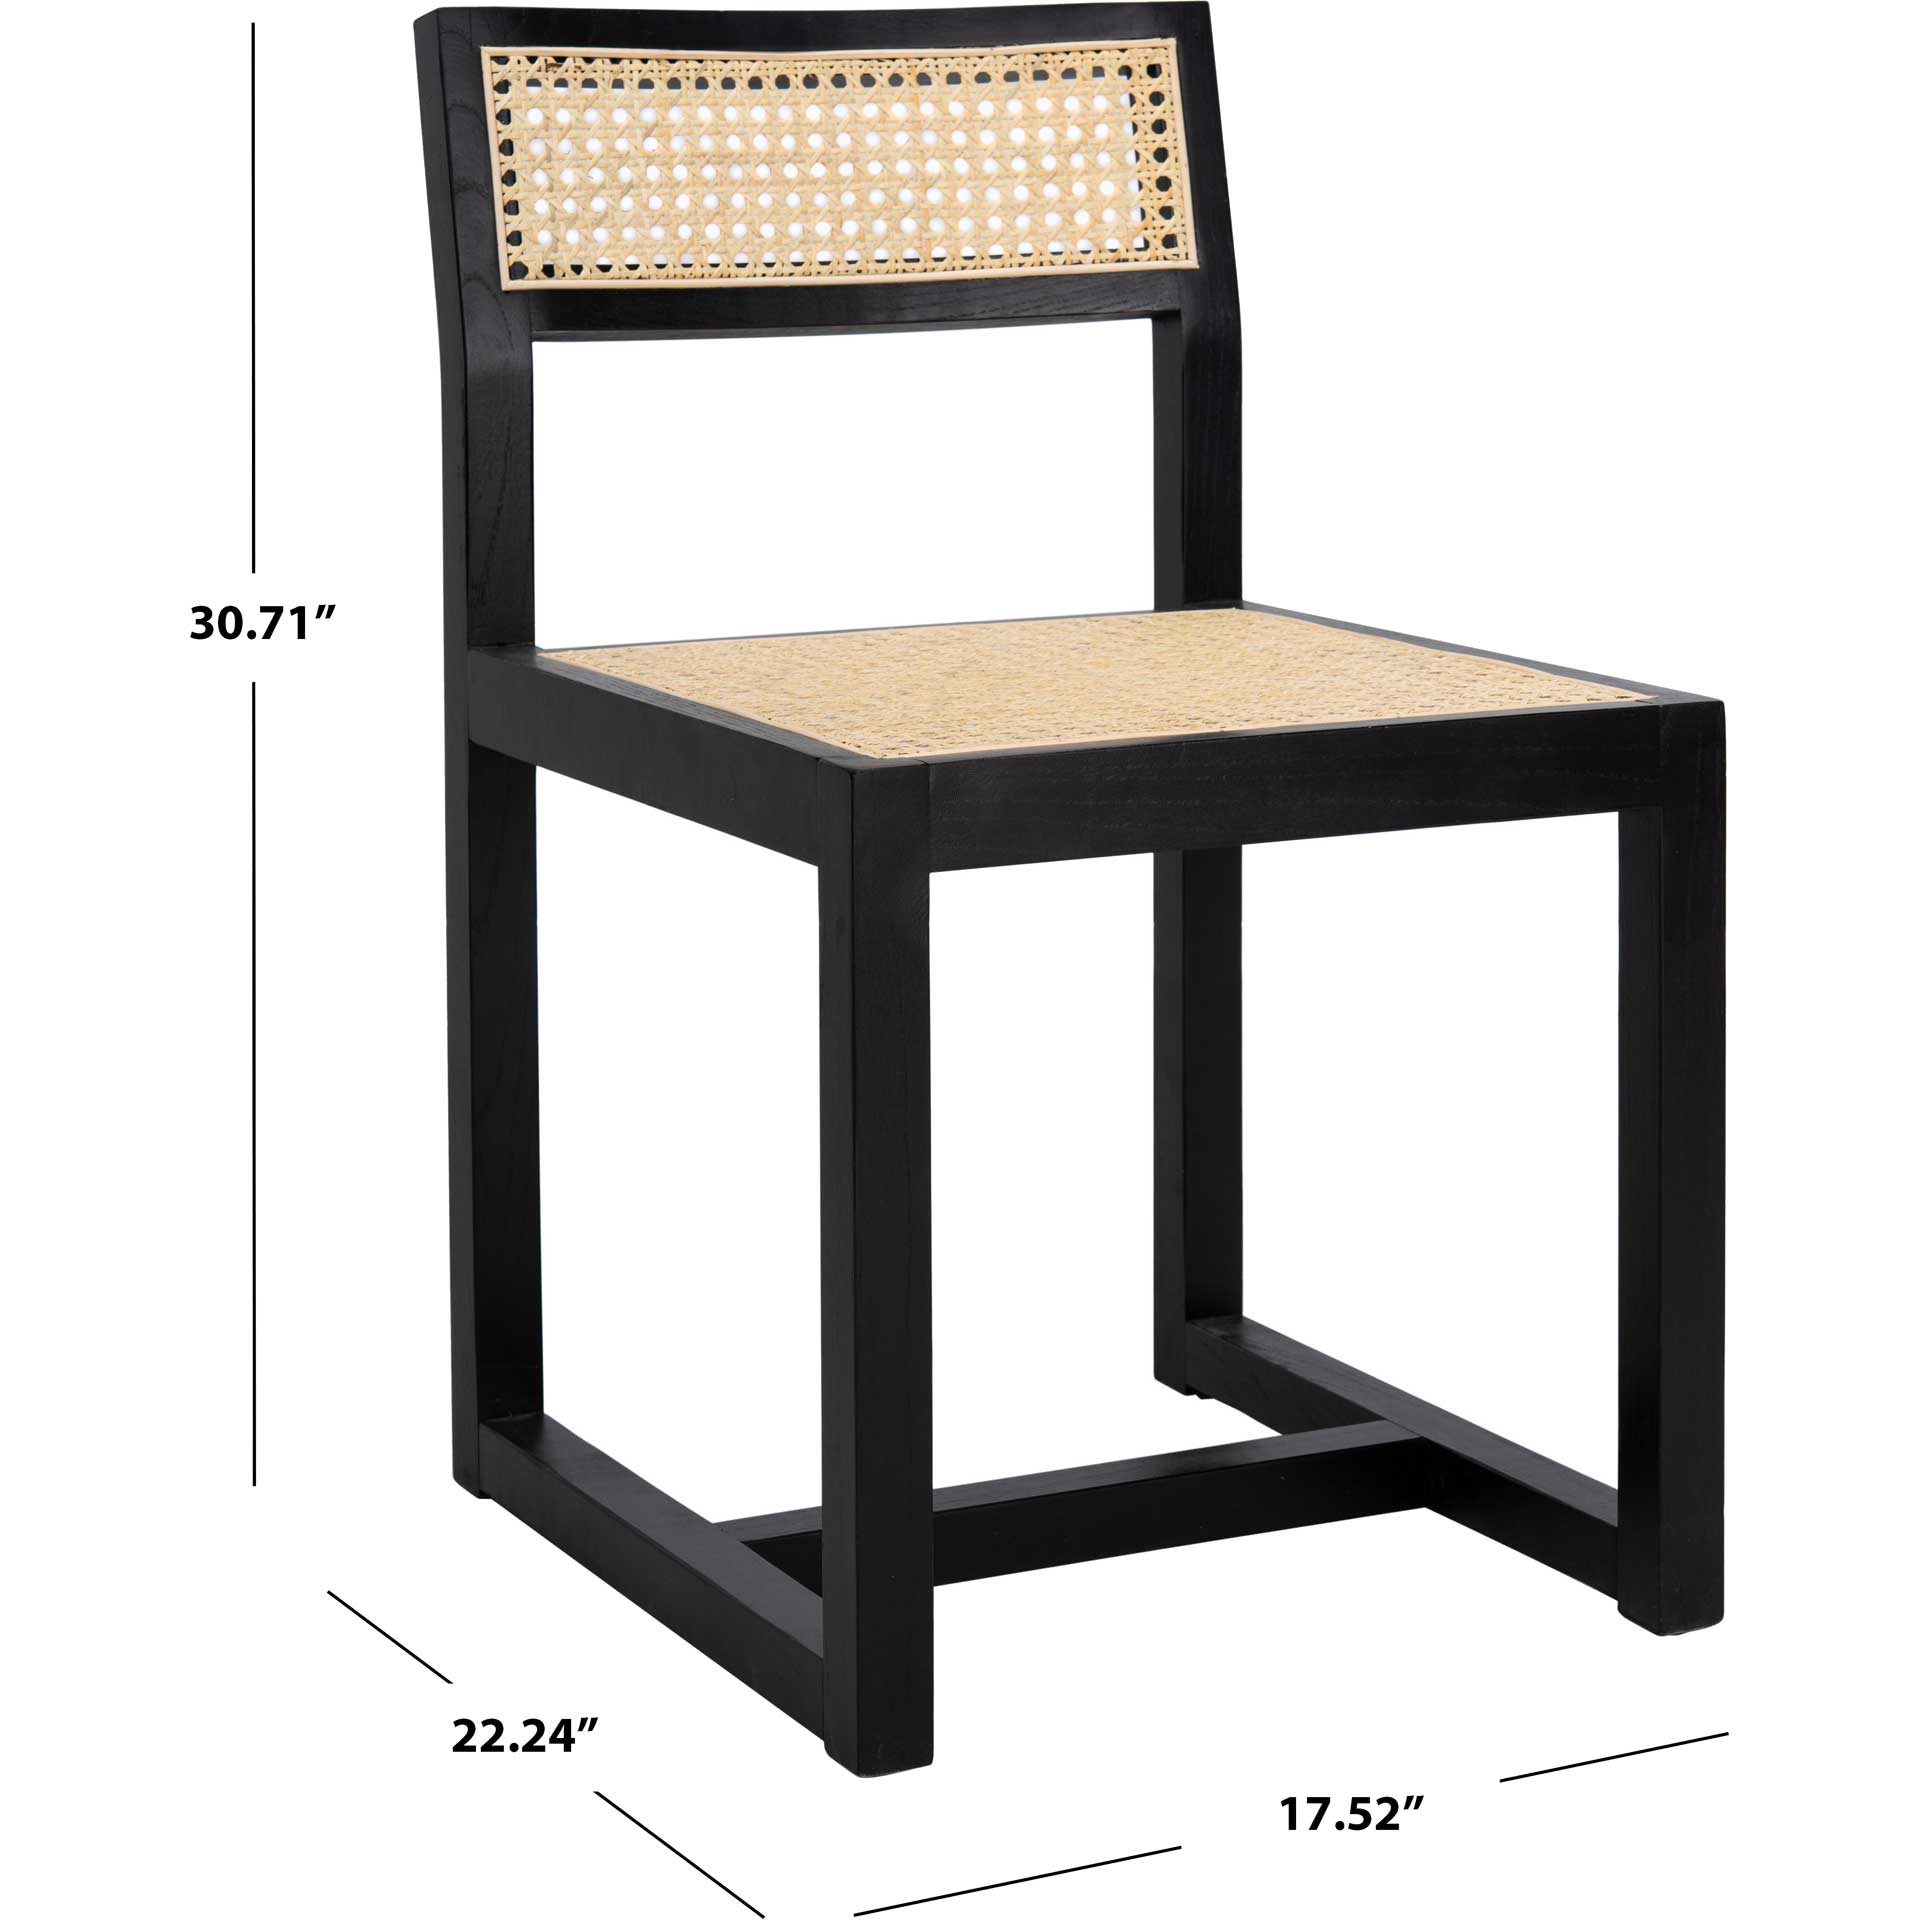 Bellini Cane Dining Chair Black/Natural